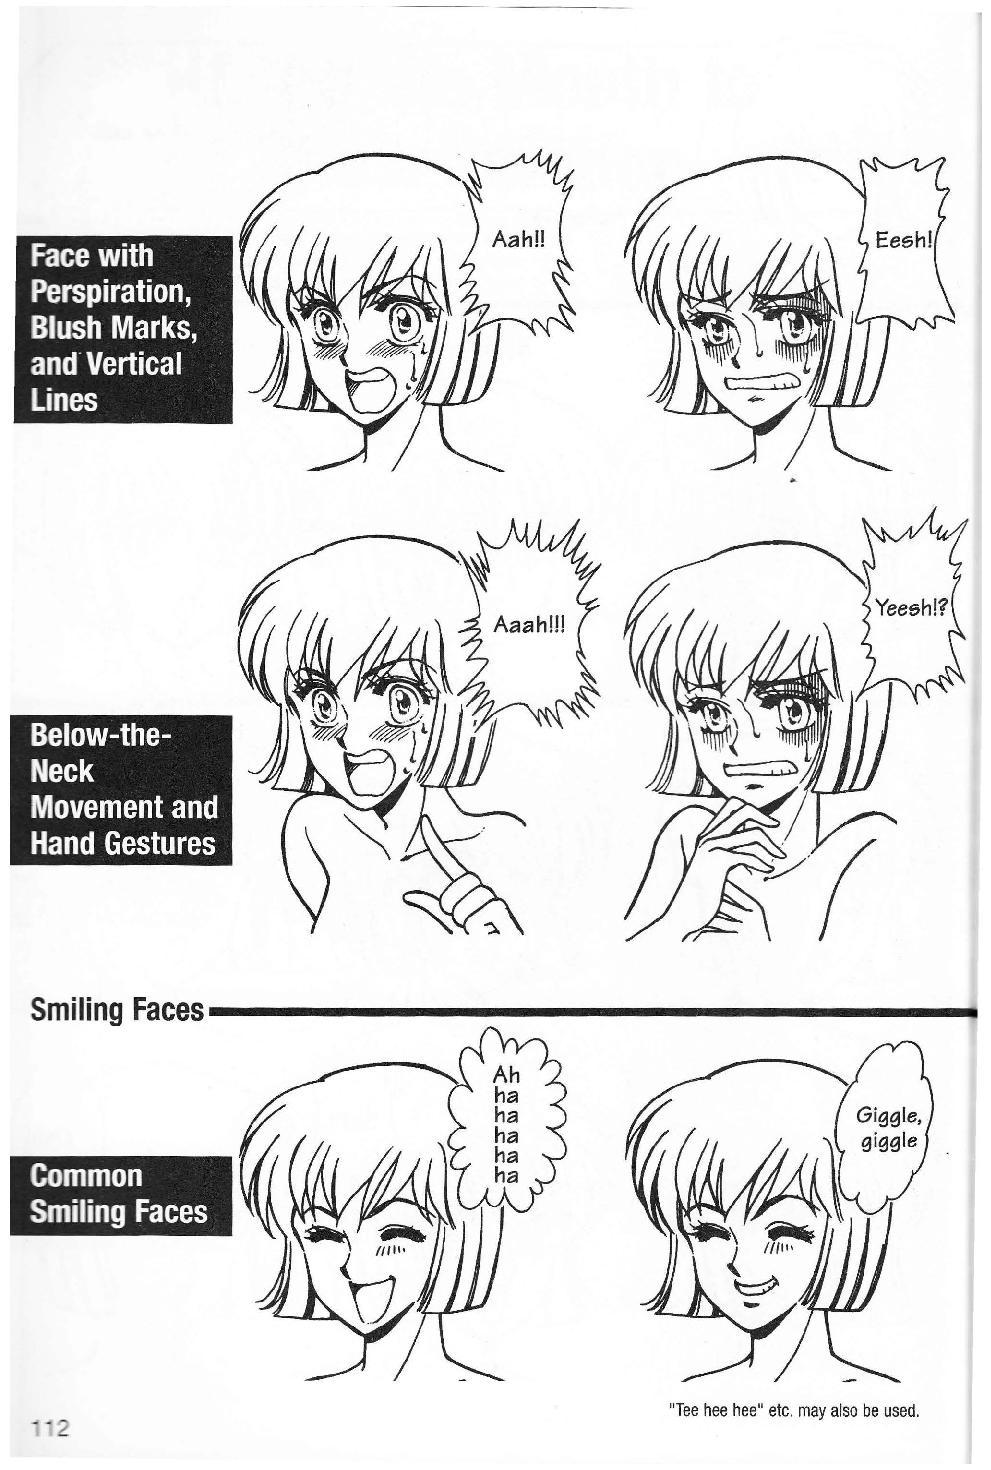 More How to Draw Manga Vol. 2 - Penning Characters 113